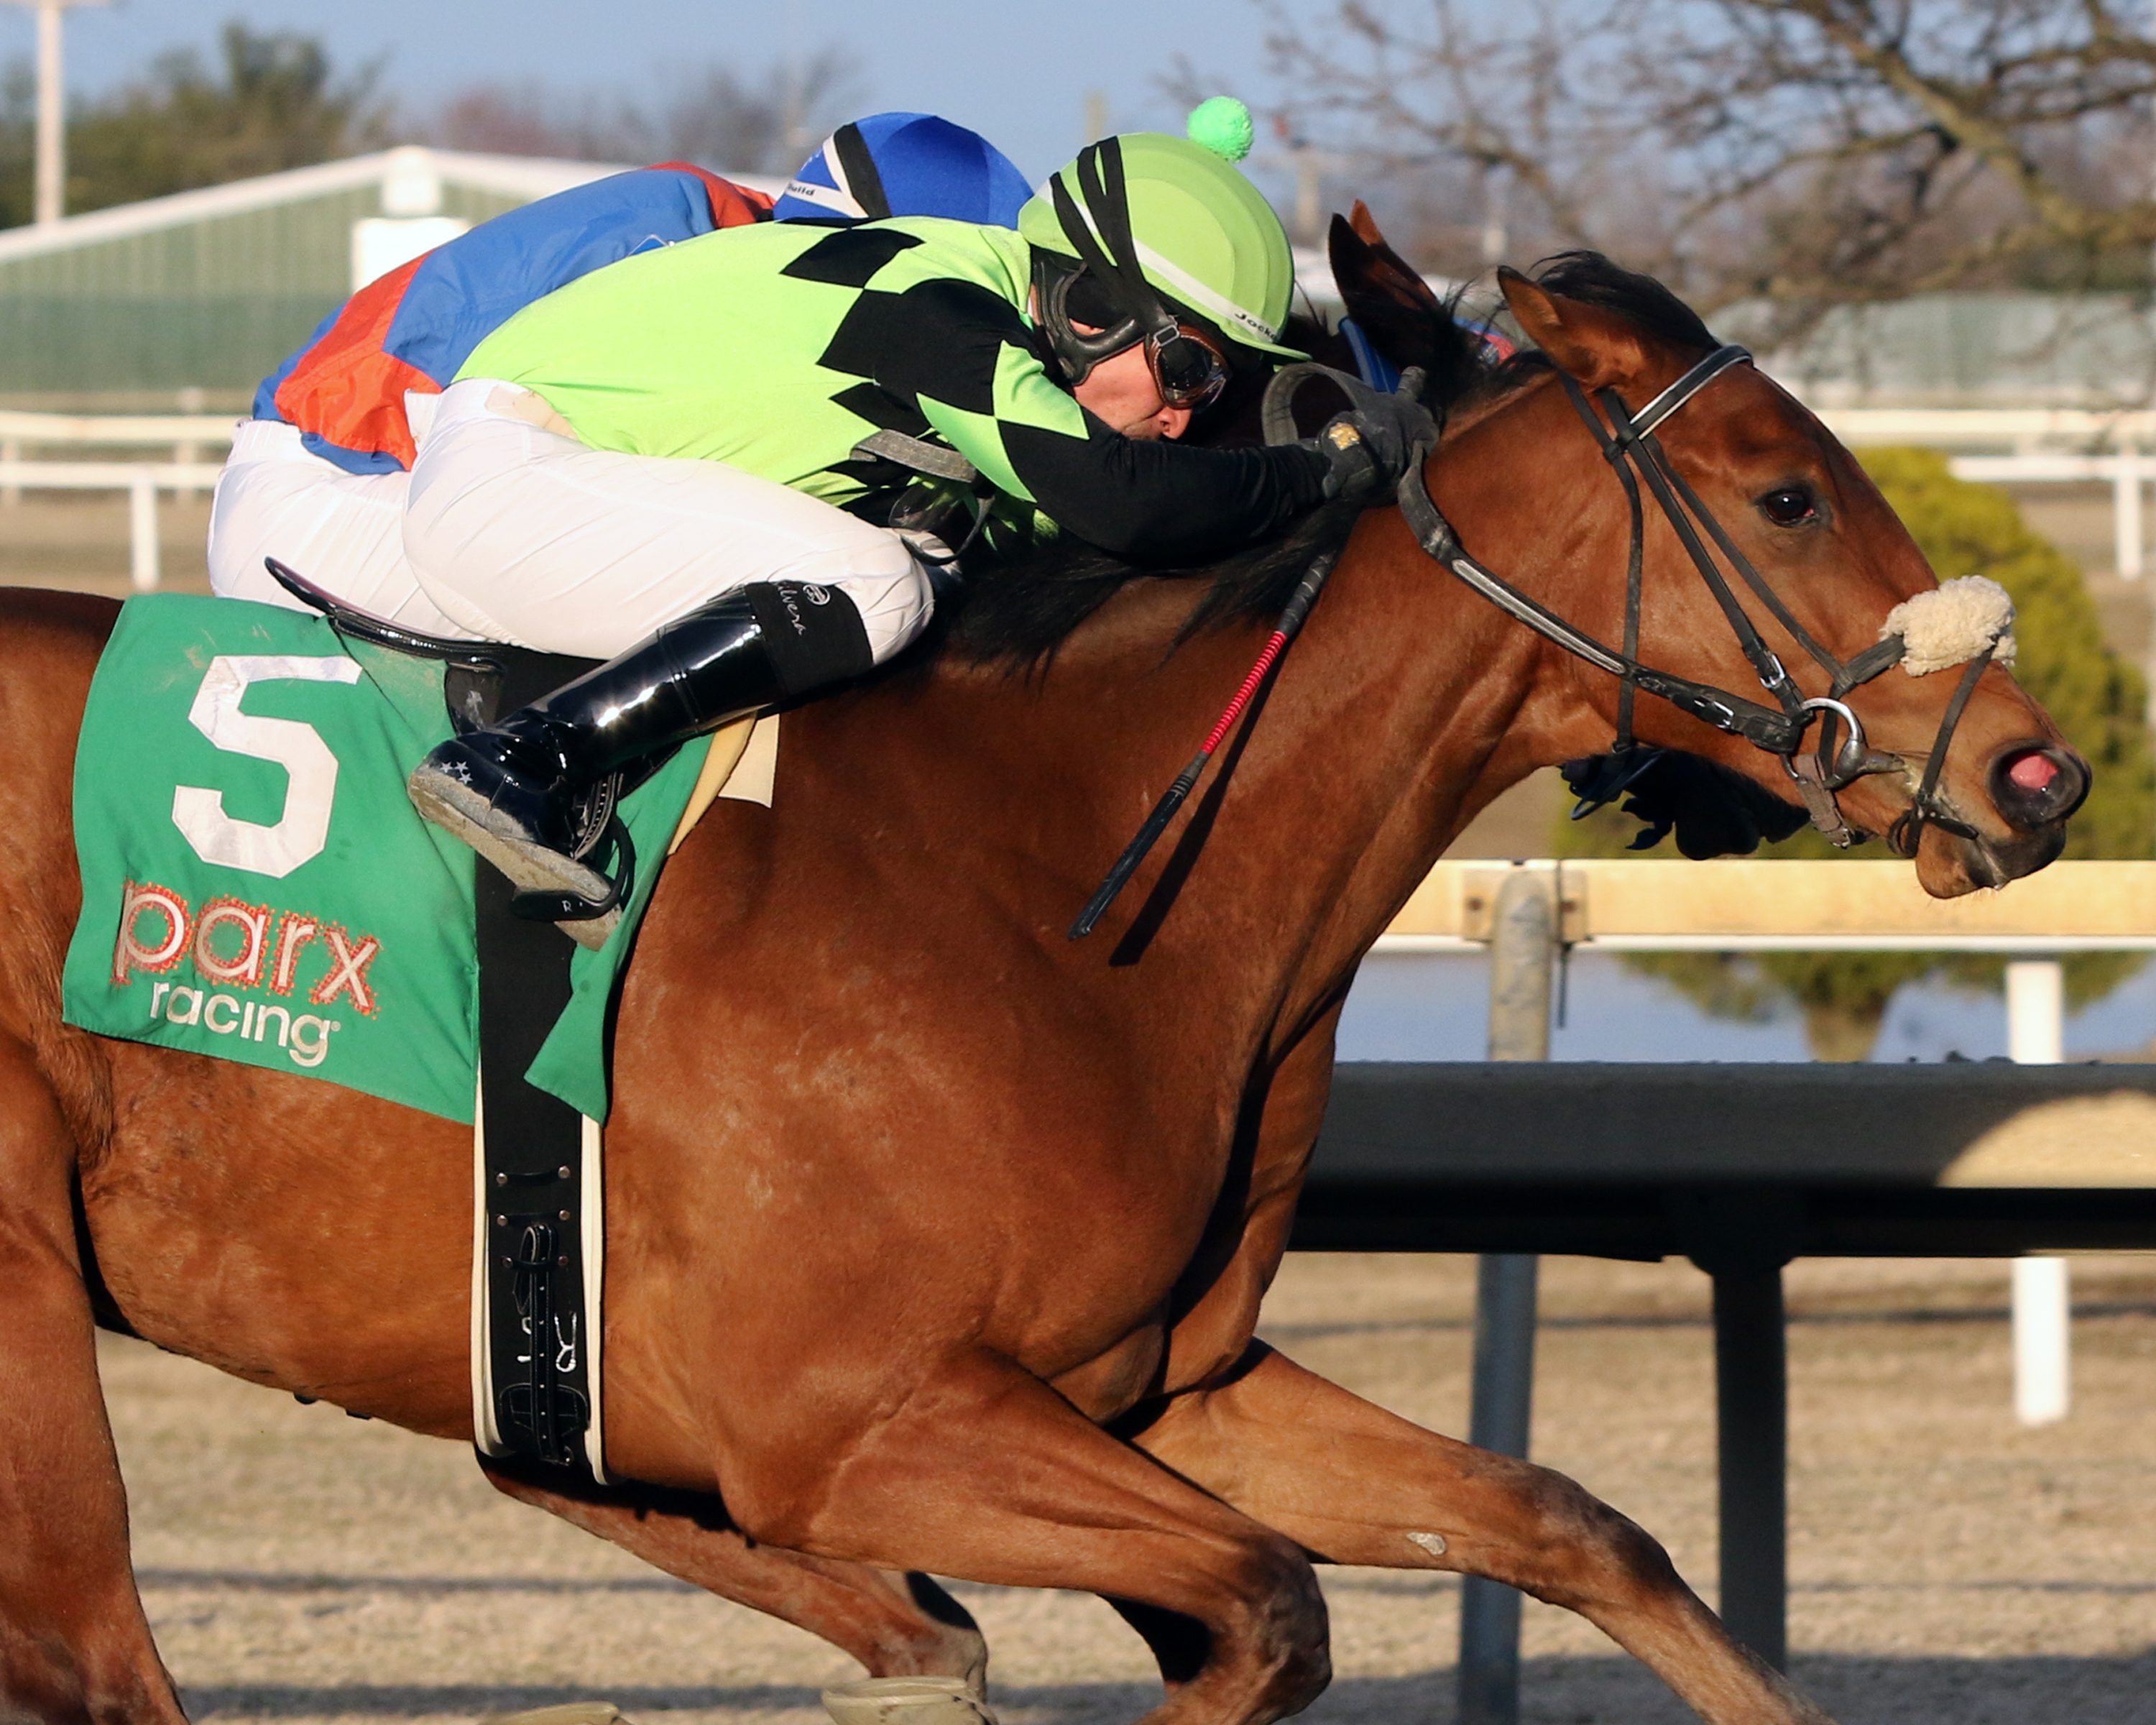 Twisted Ride with Ruben Silvera win The City of Brotherly Love at Parx on March 8, 2022. Photo By: Chad B. Harmon